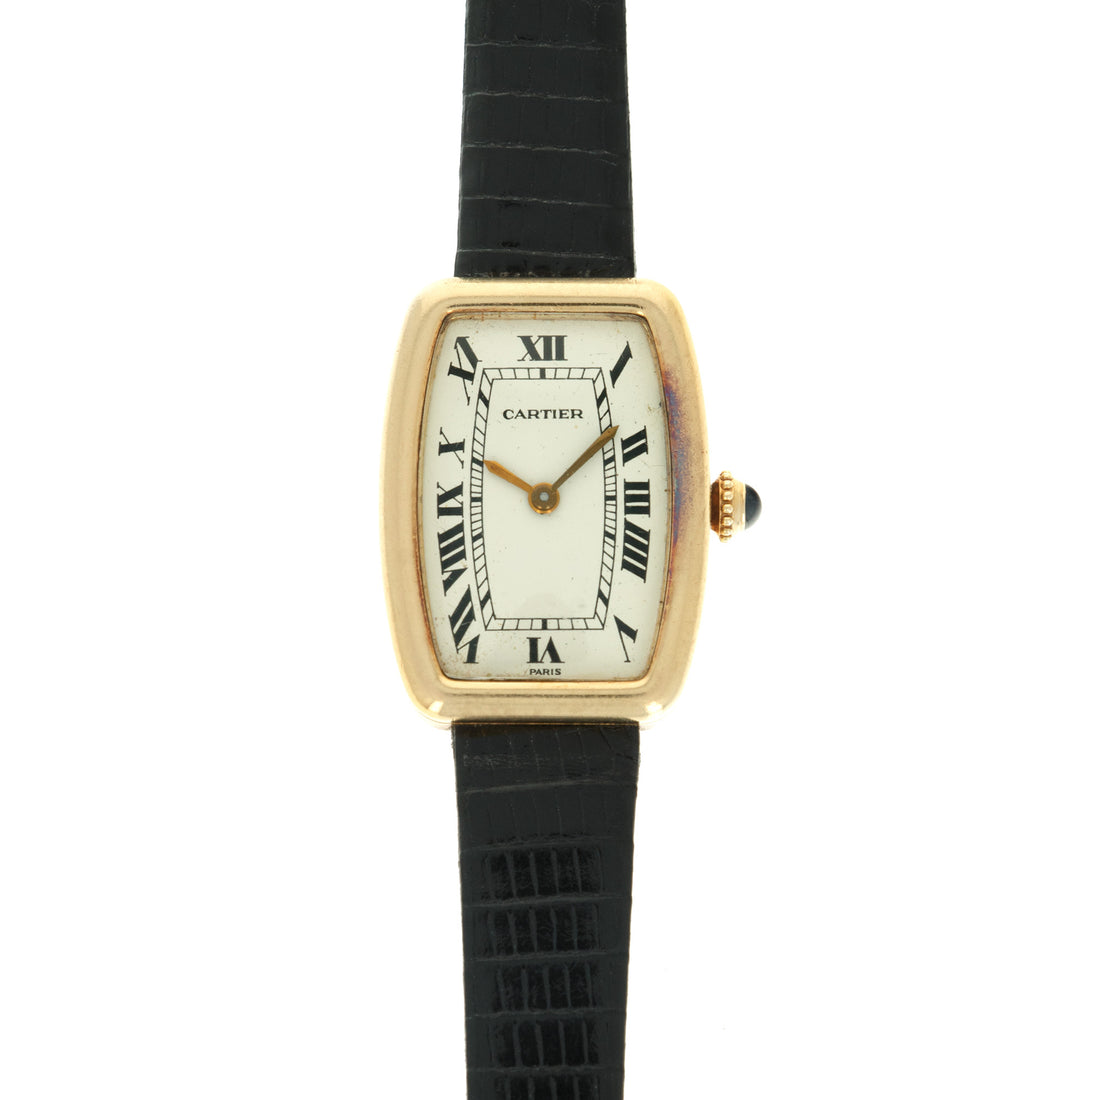 Cartier Tank Faberge N/A 18k YG – The Keystone Watches